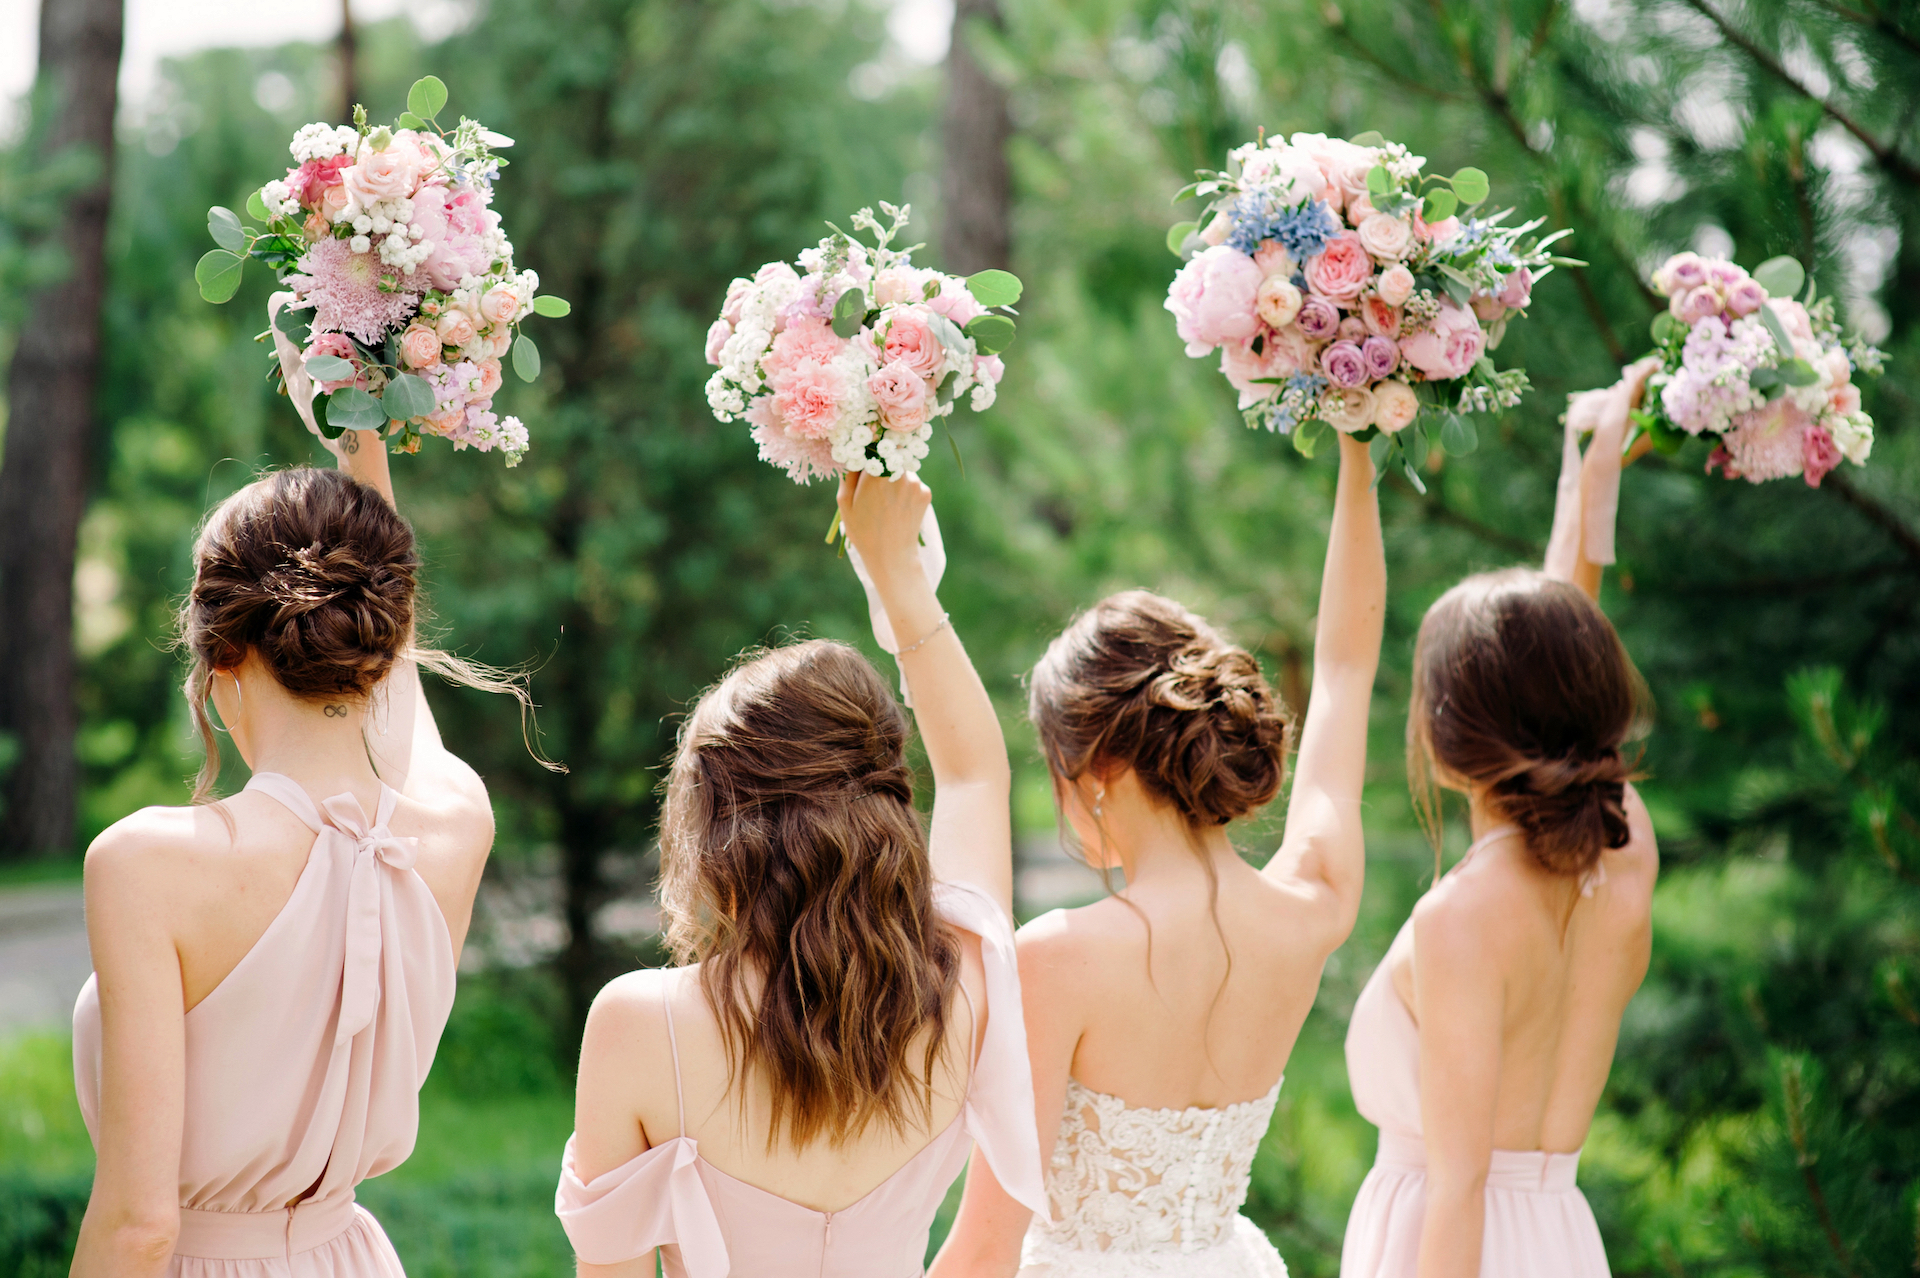 image of bride and bridesmaids holding wedding bouquets